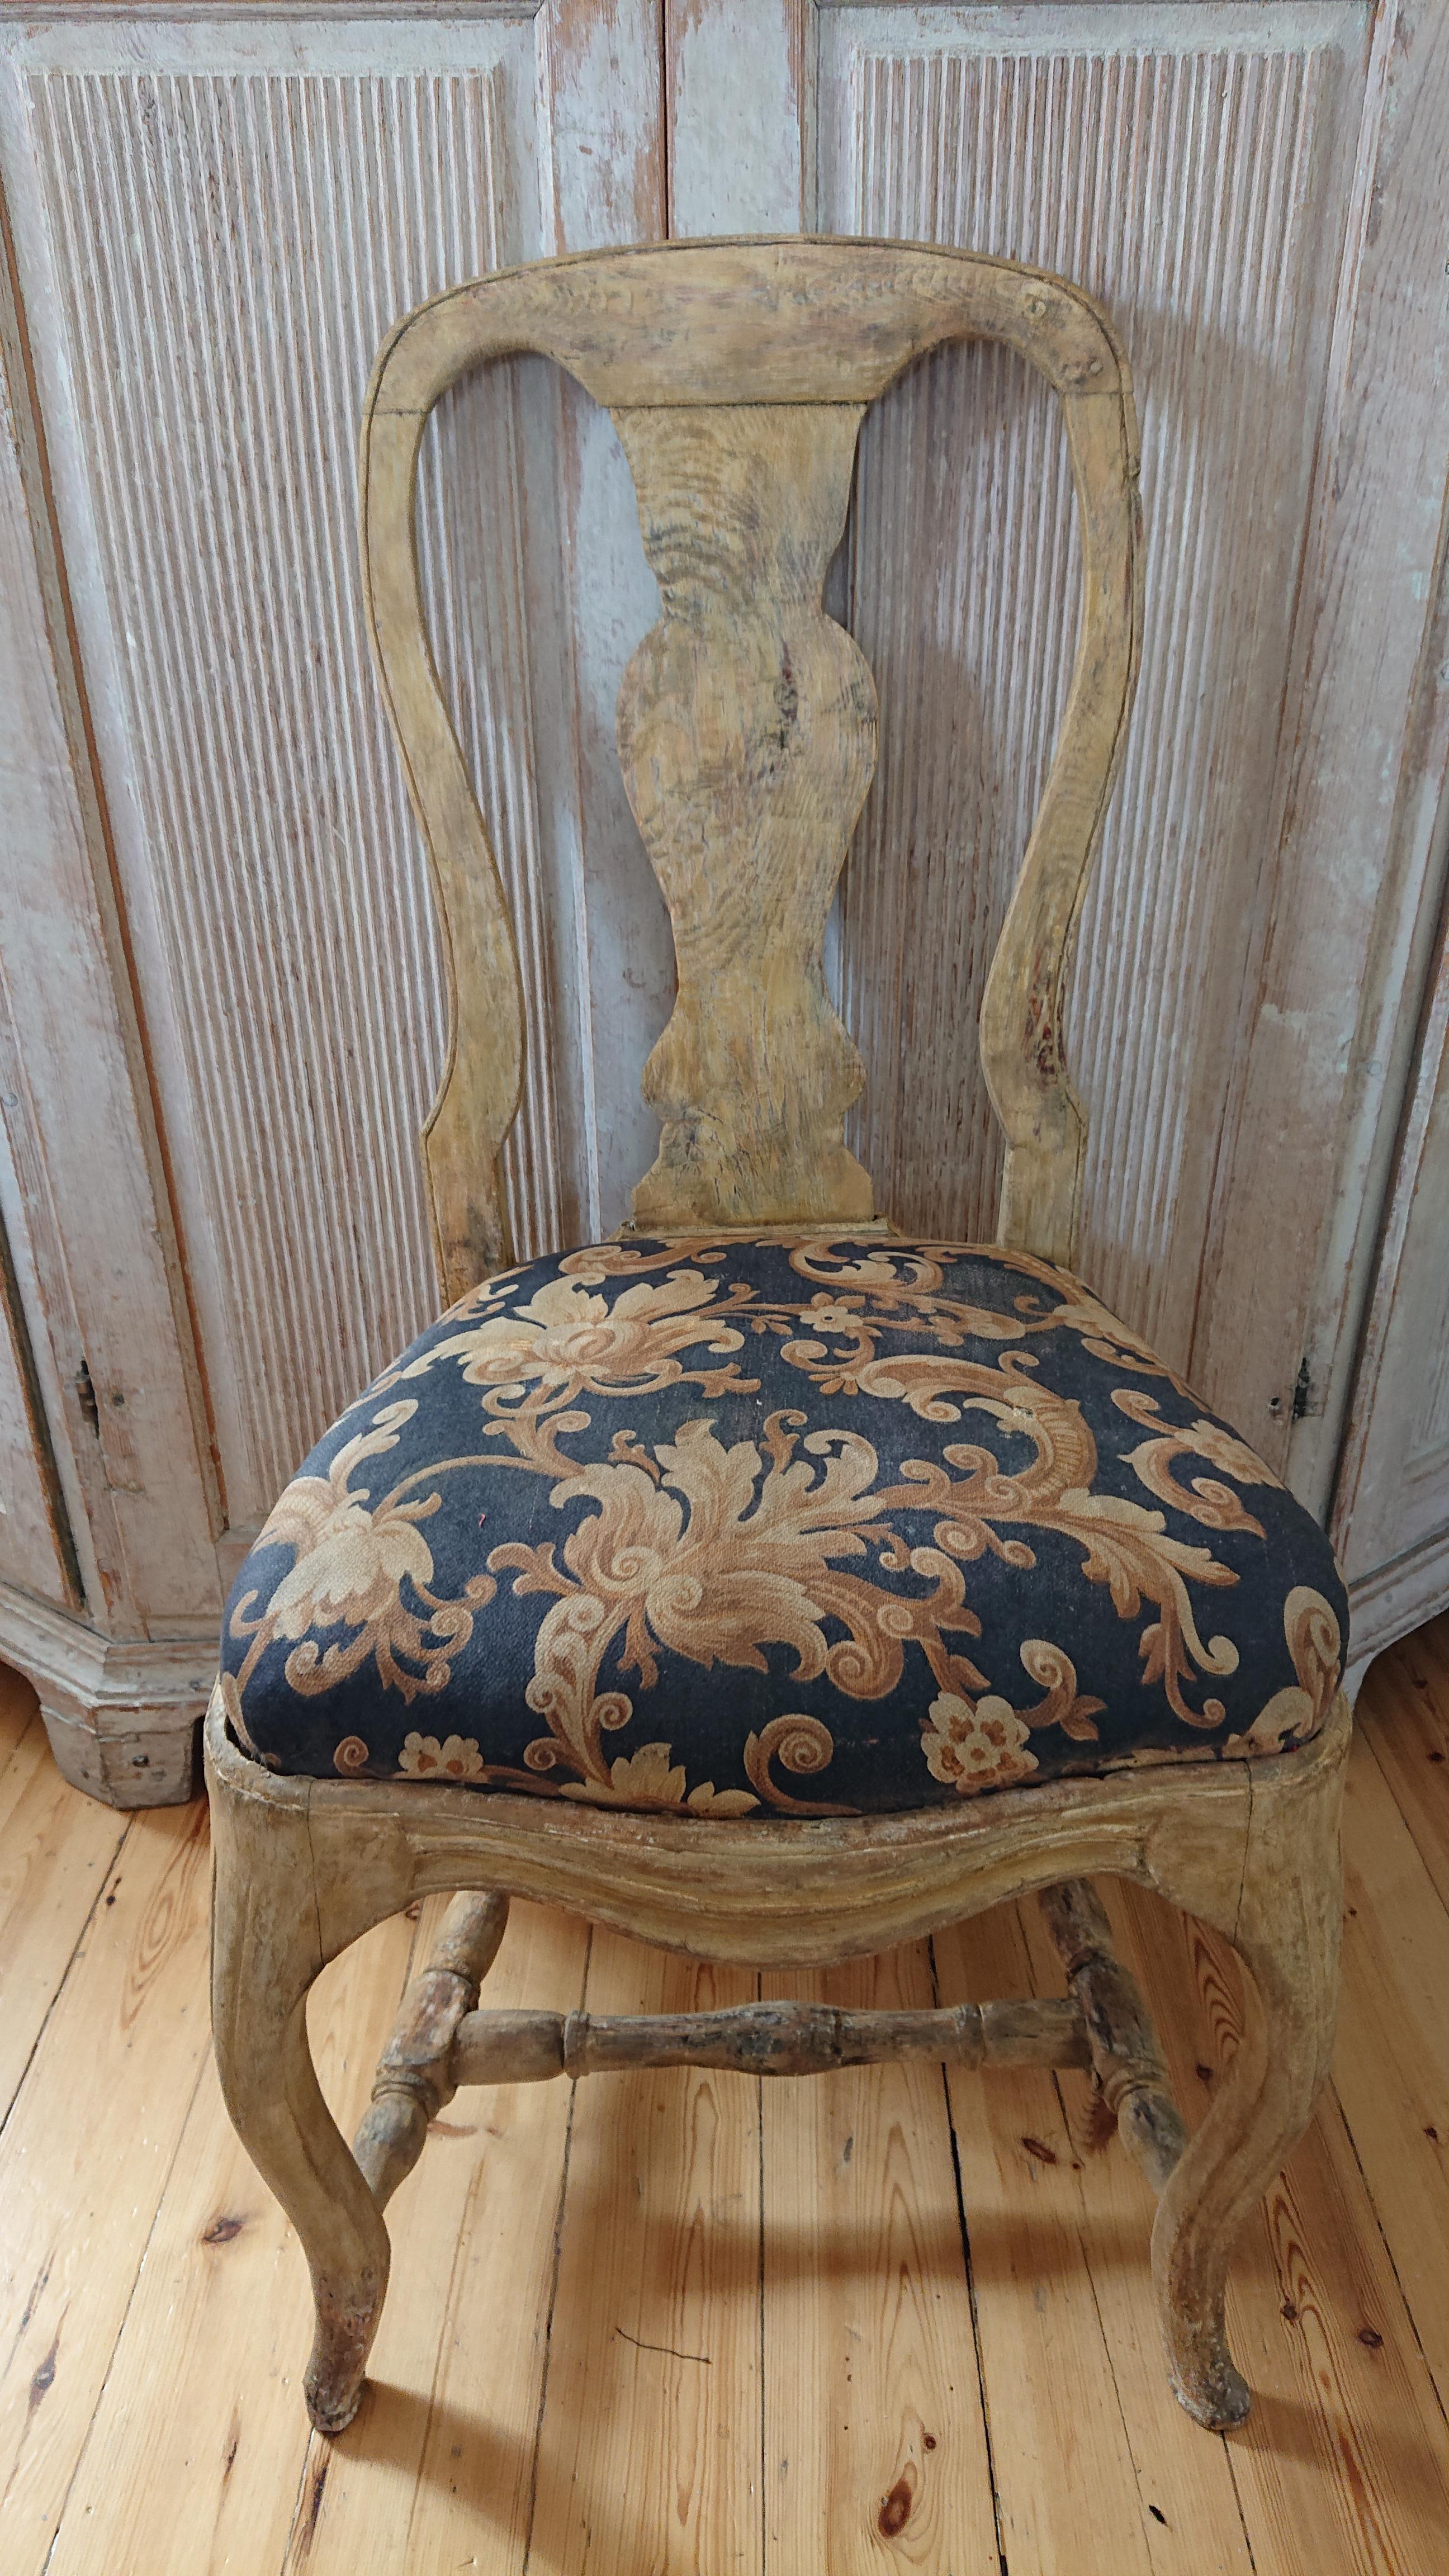 Fine 18th Century Swedish Roccoco chair with marks of (The Swedish Royal Treasury) HGK 
It comes from the upper class environment.
A fantastic chair with nice proportions & curvy legs.
Scraped by hand to its original color with retouches.
The